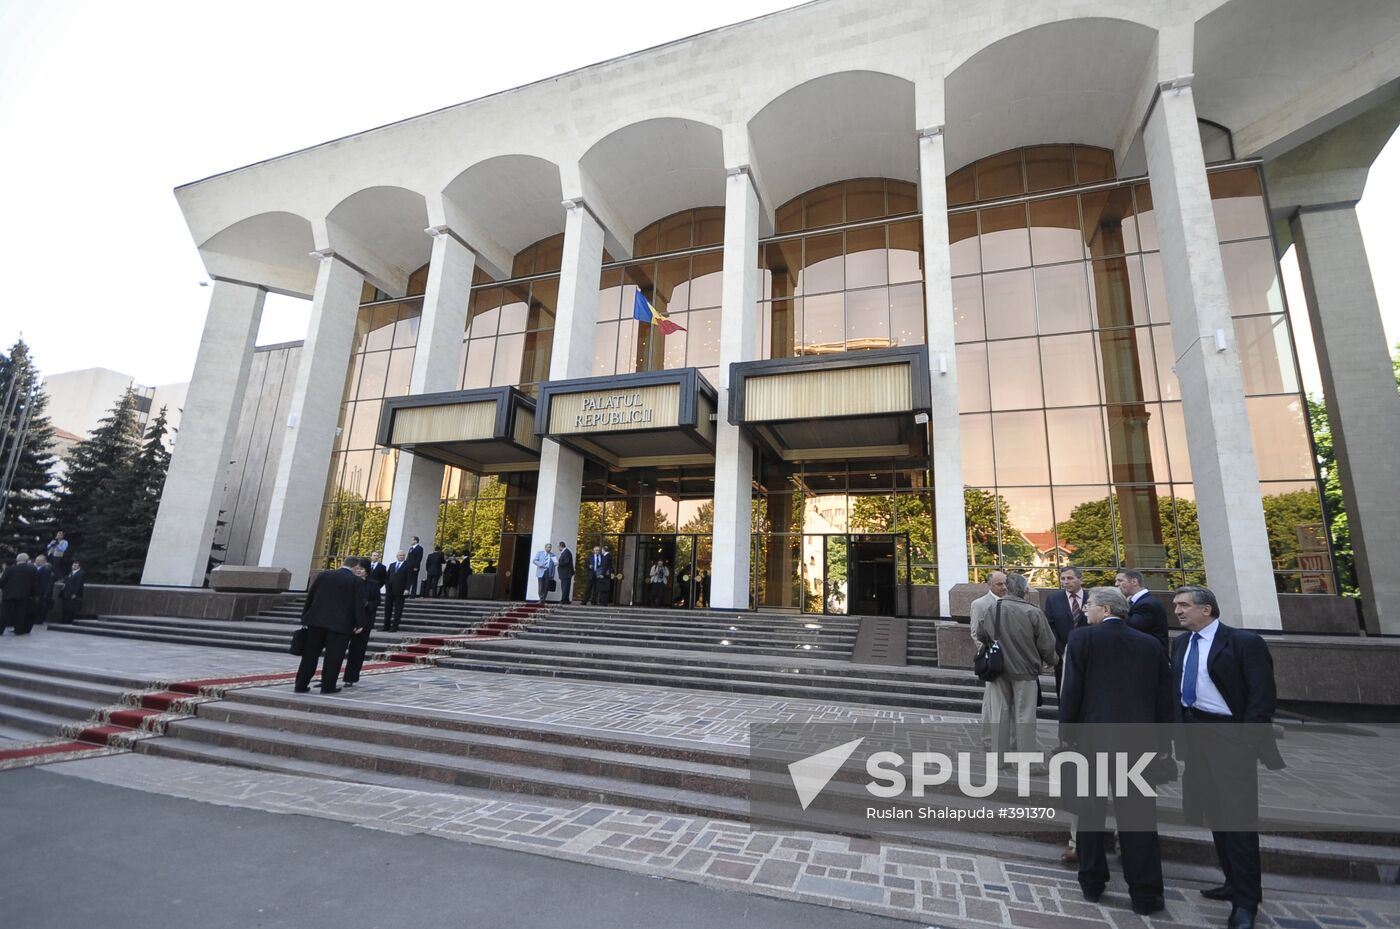 New Moldovan Parliament gathers for first meeting